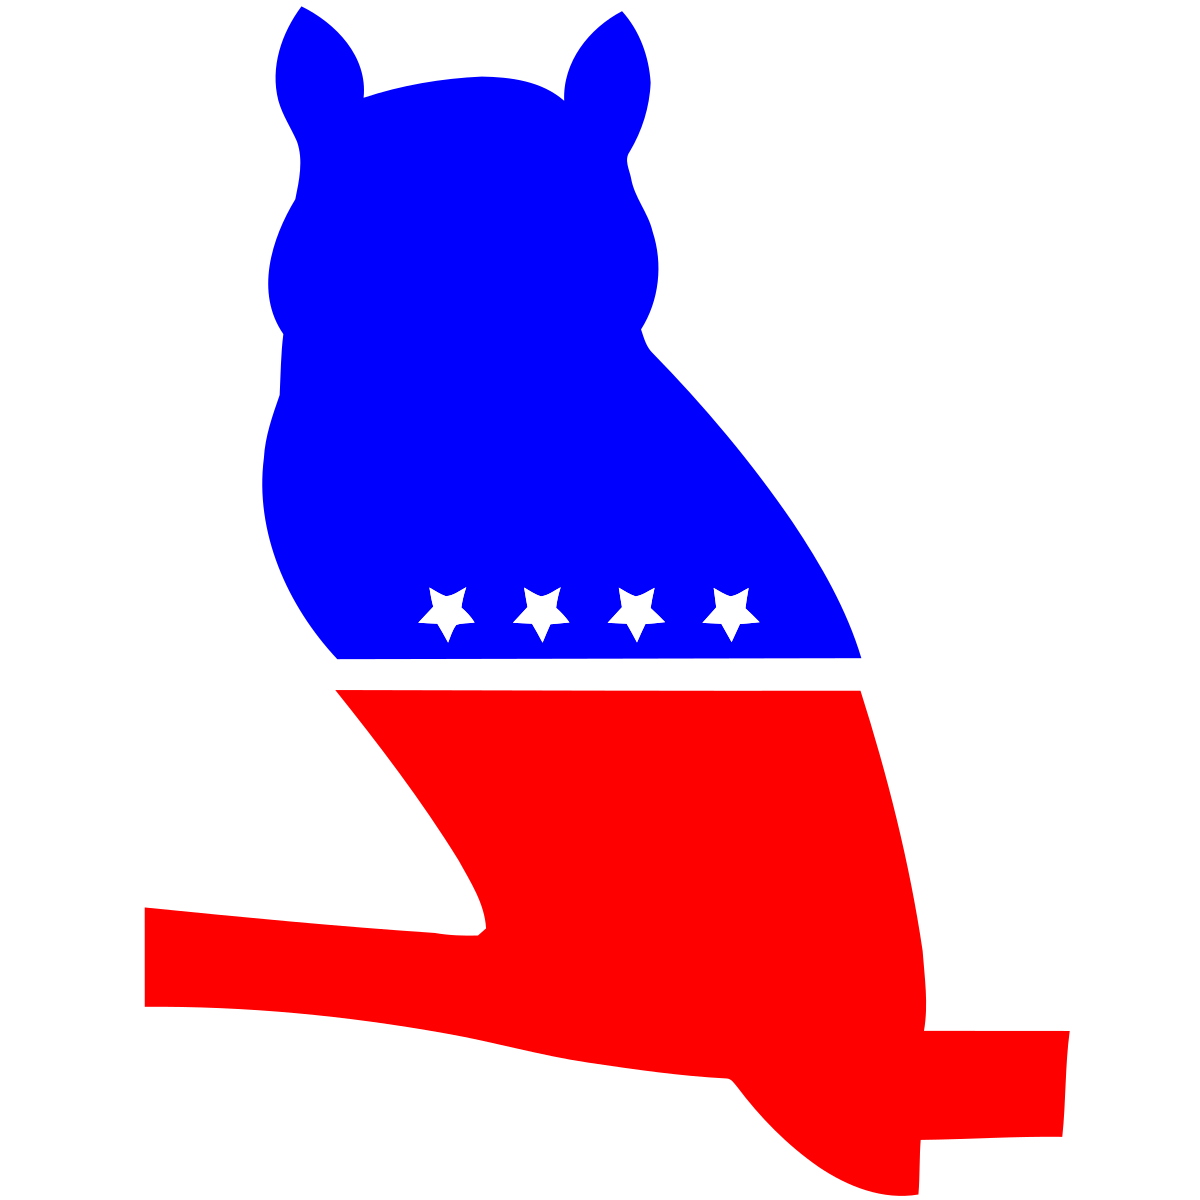 Modern whig party wikipedia. Democracy clipart populism